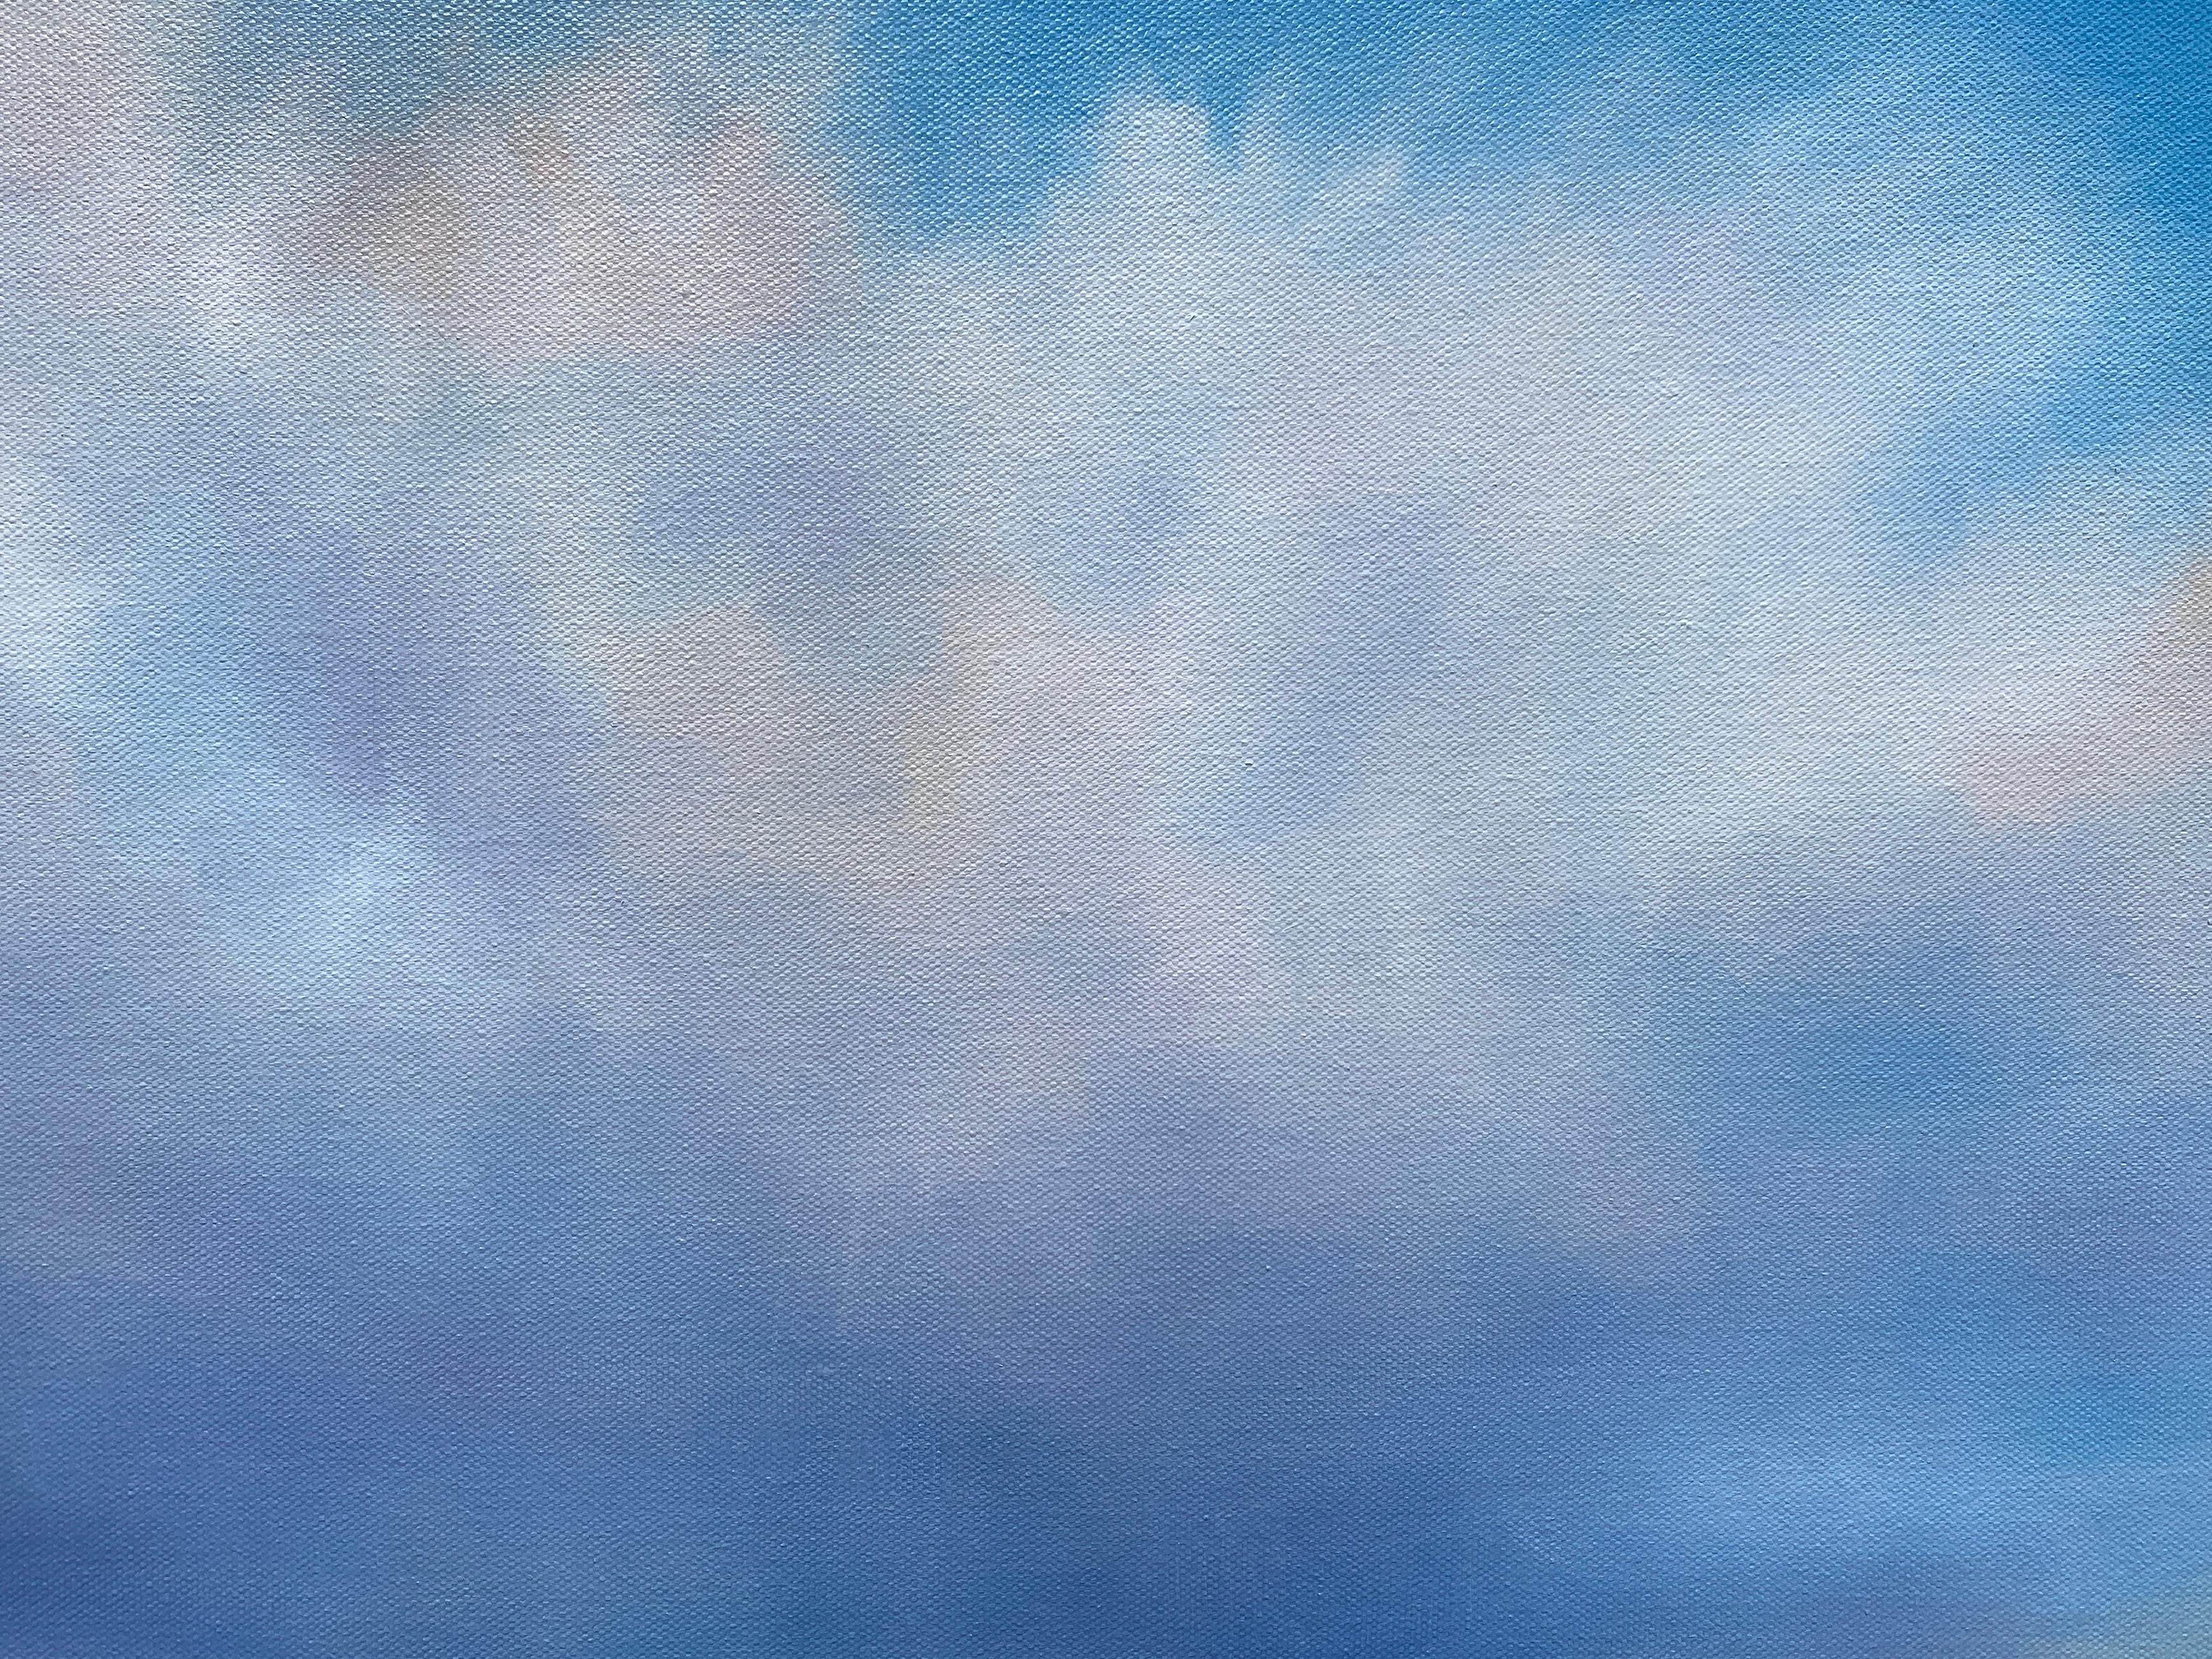 Beach Cloud, Oil Painting For Sale 1